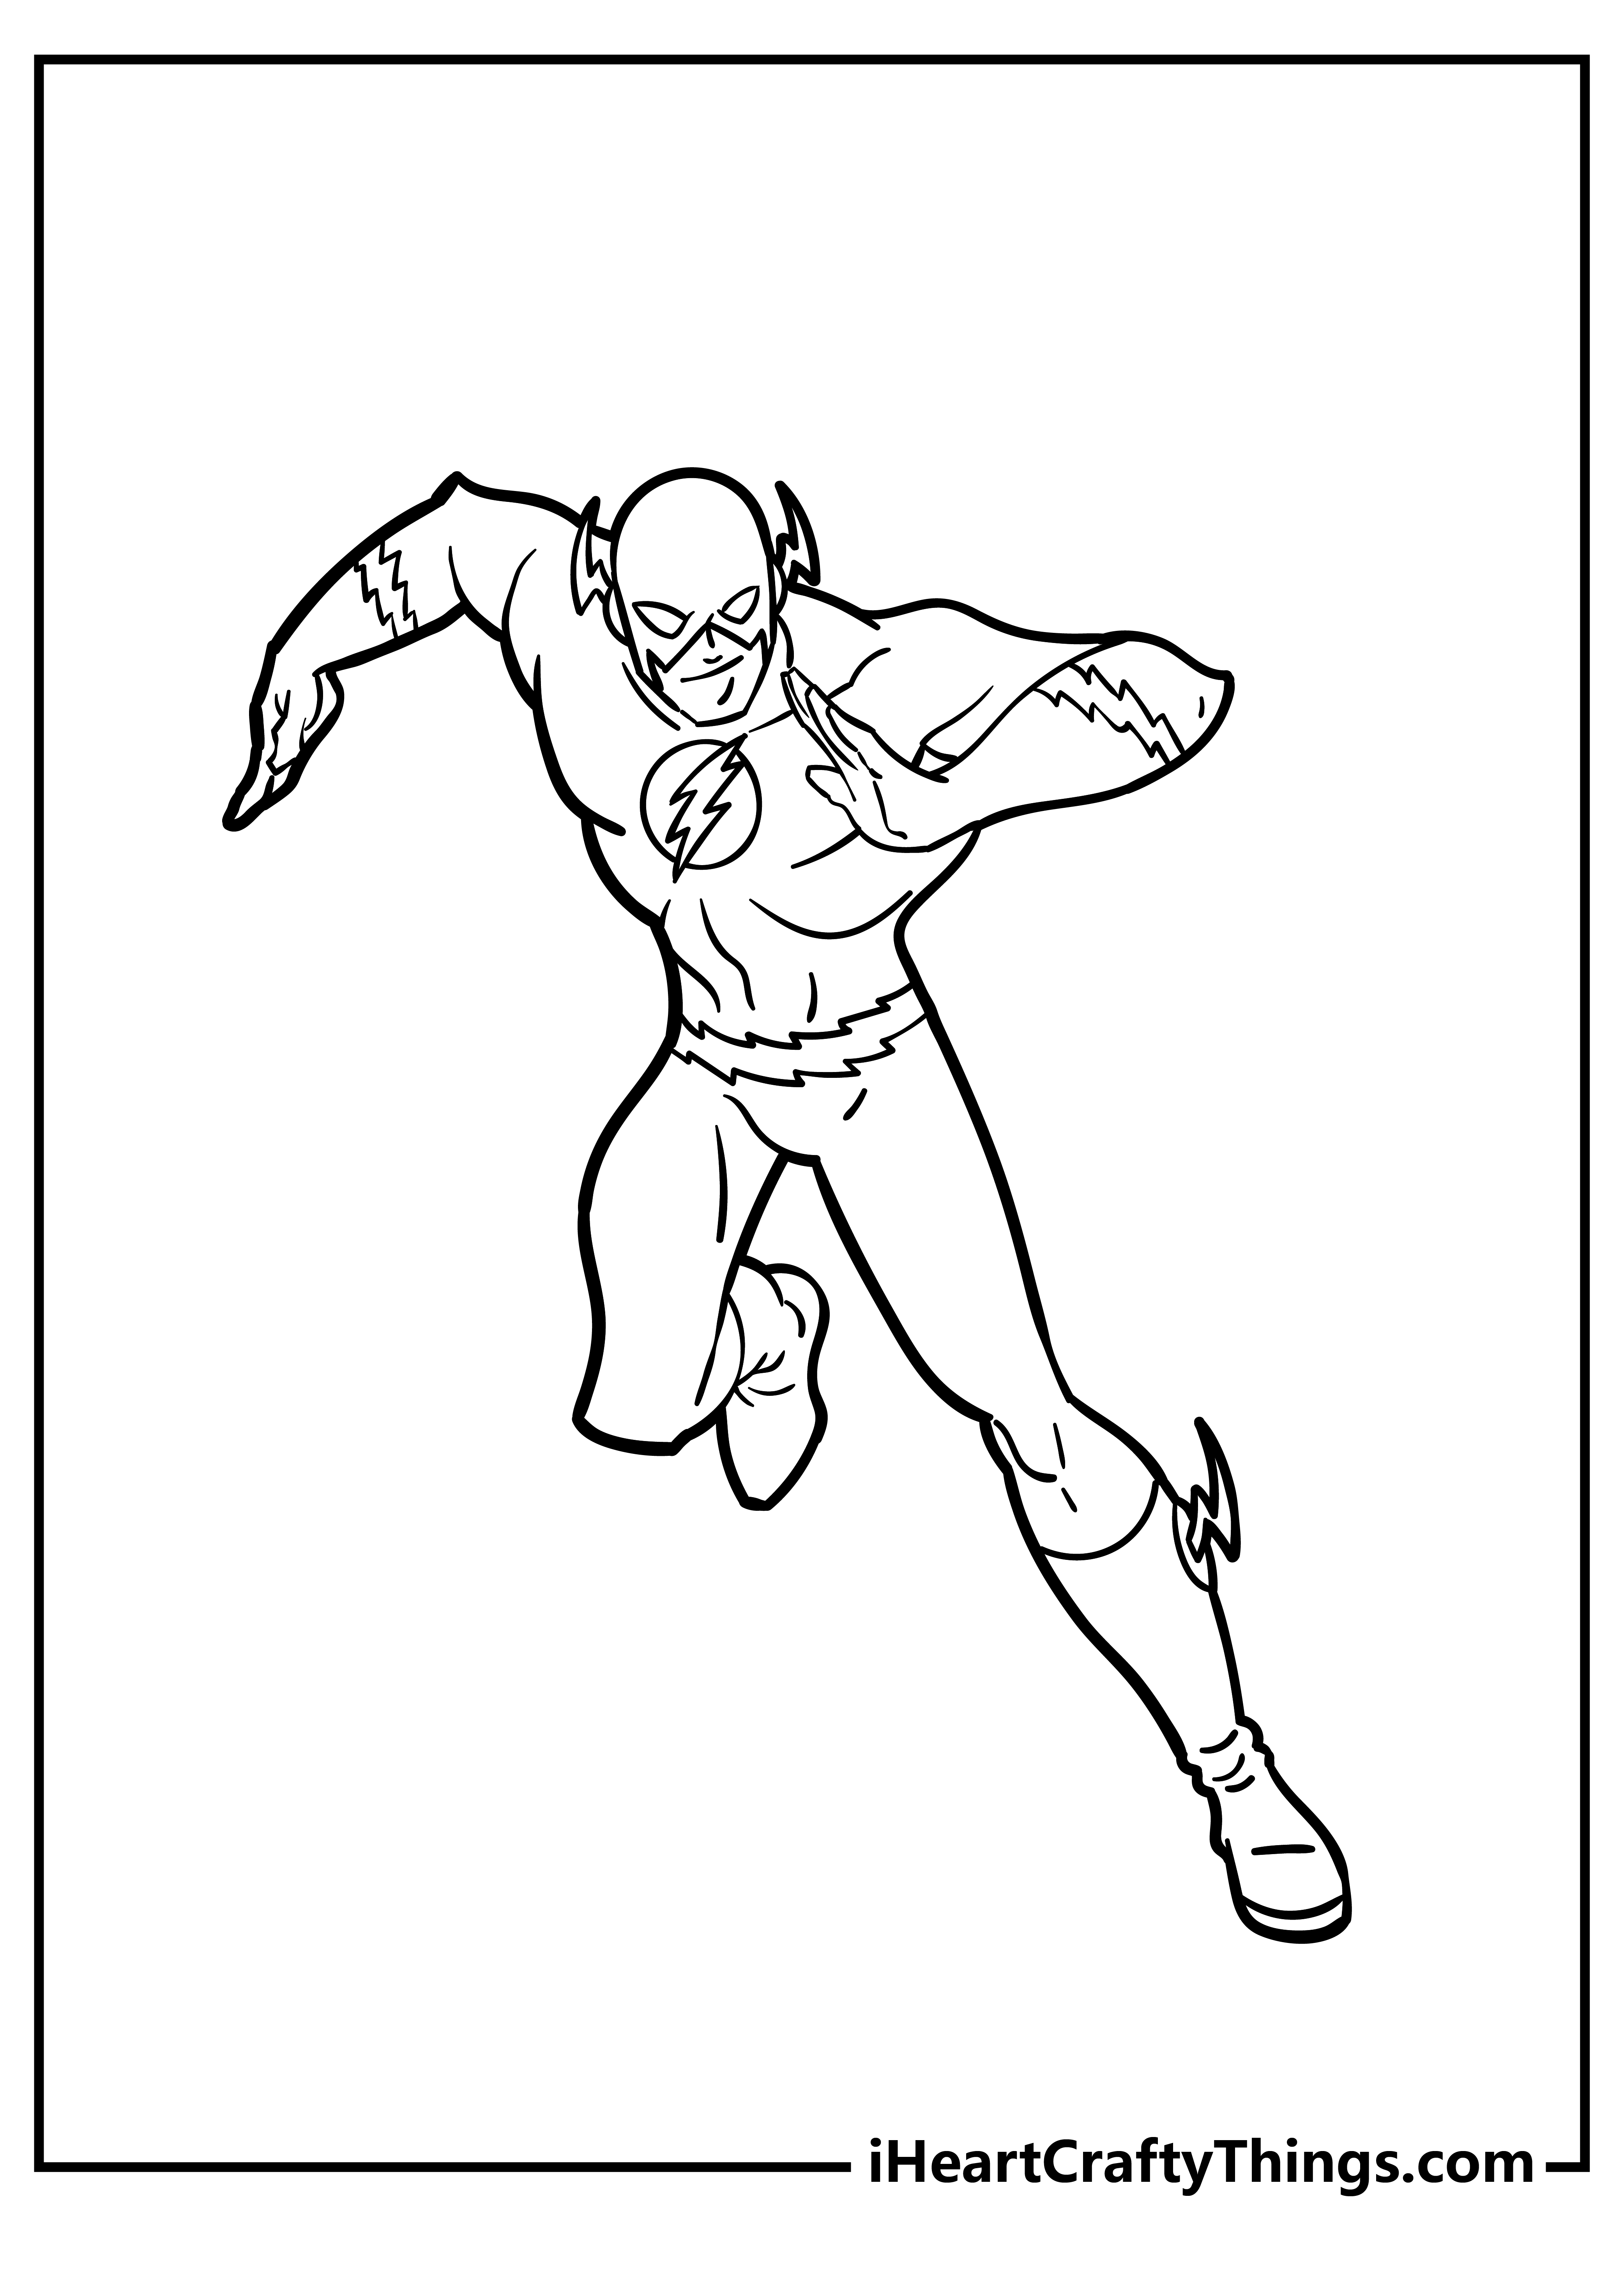 Superheroes Coloring Pages for kids free download